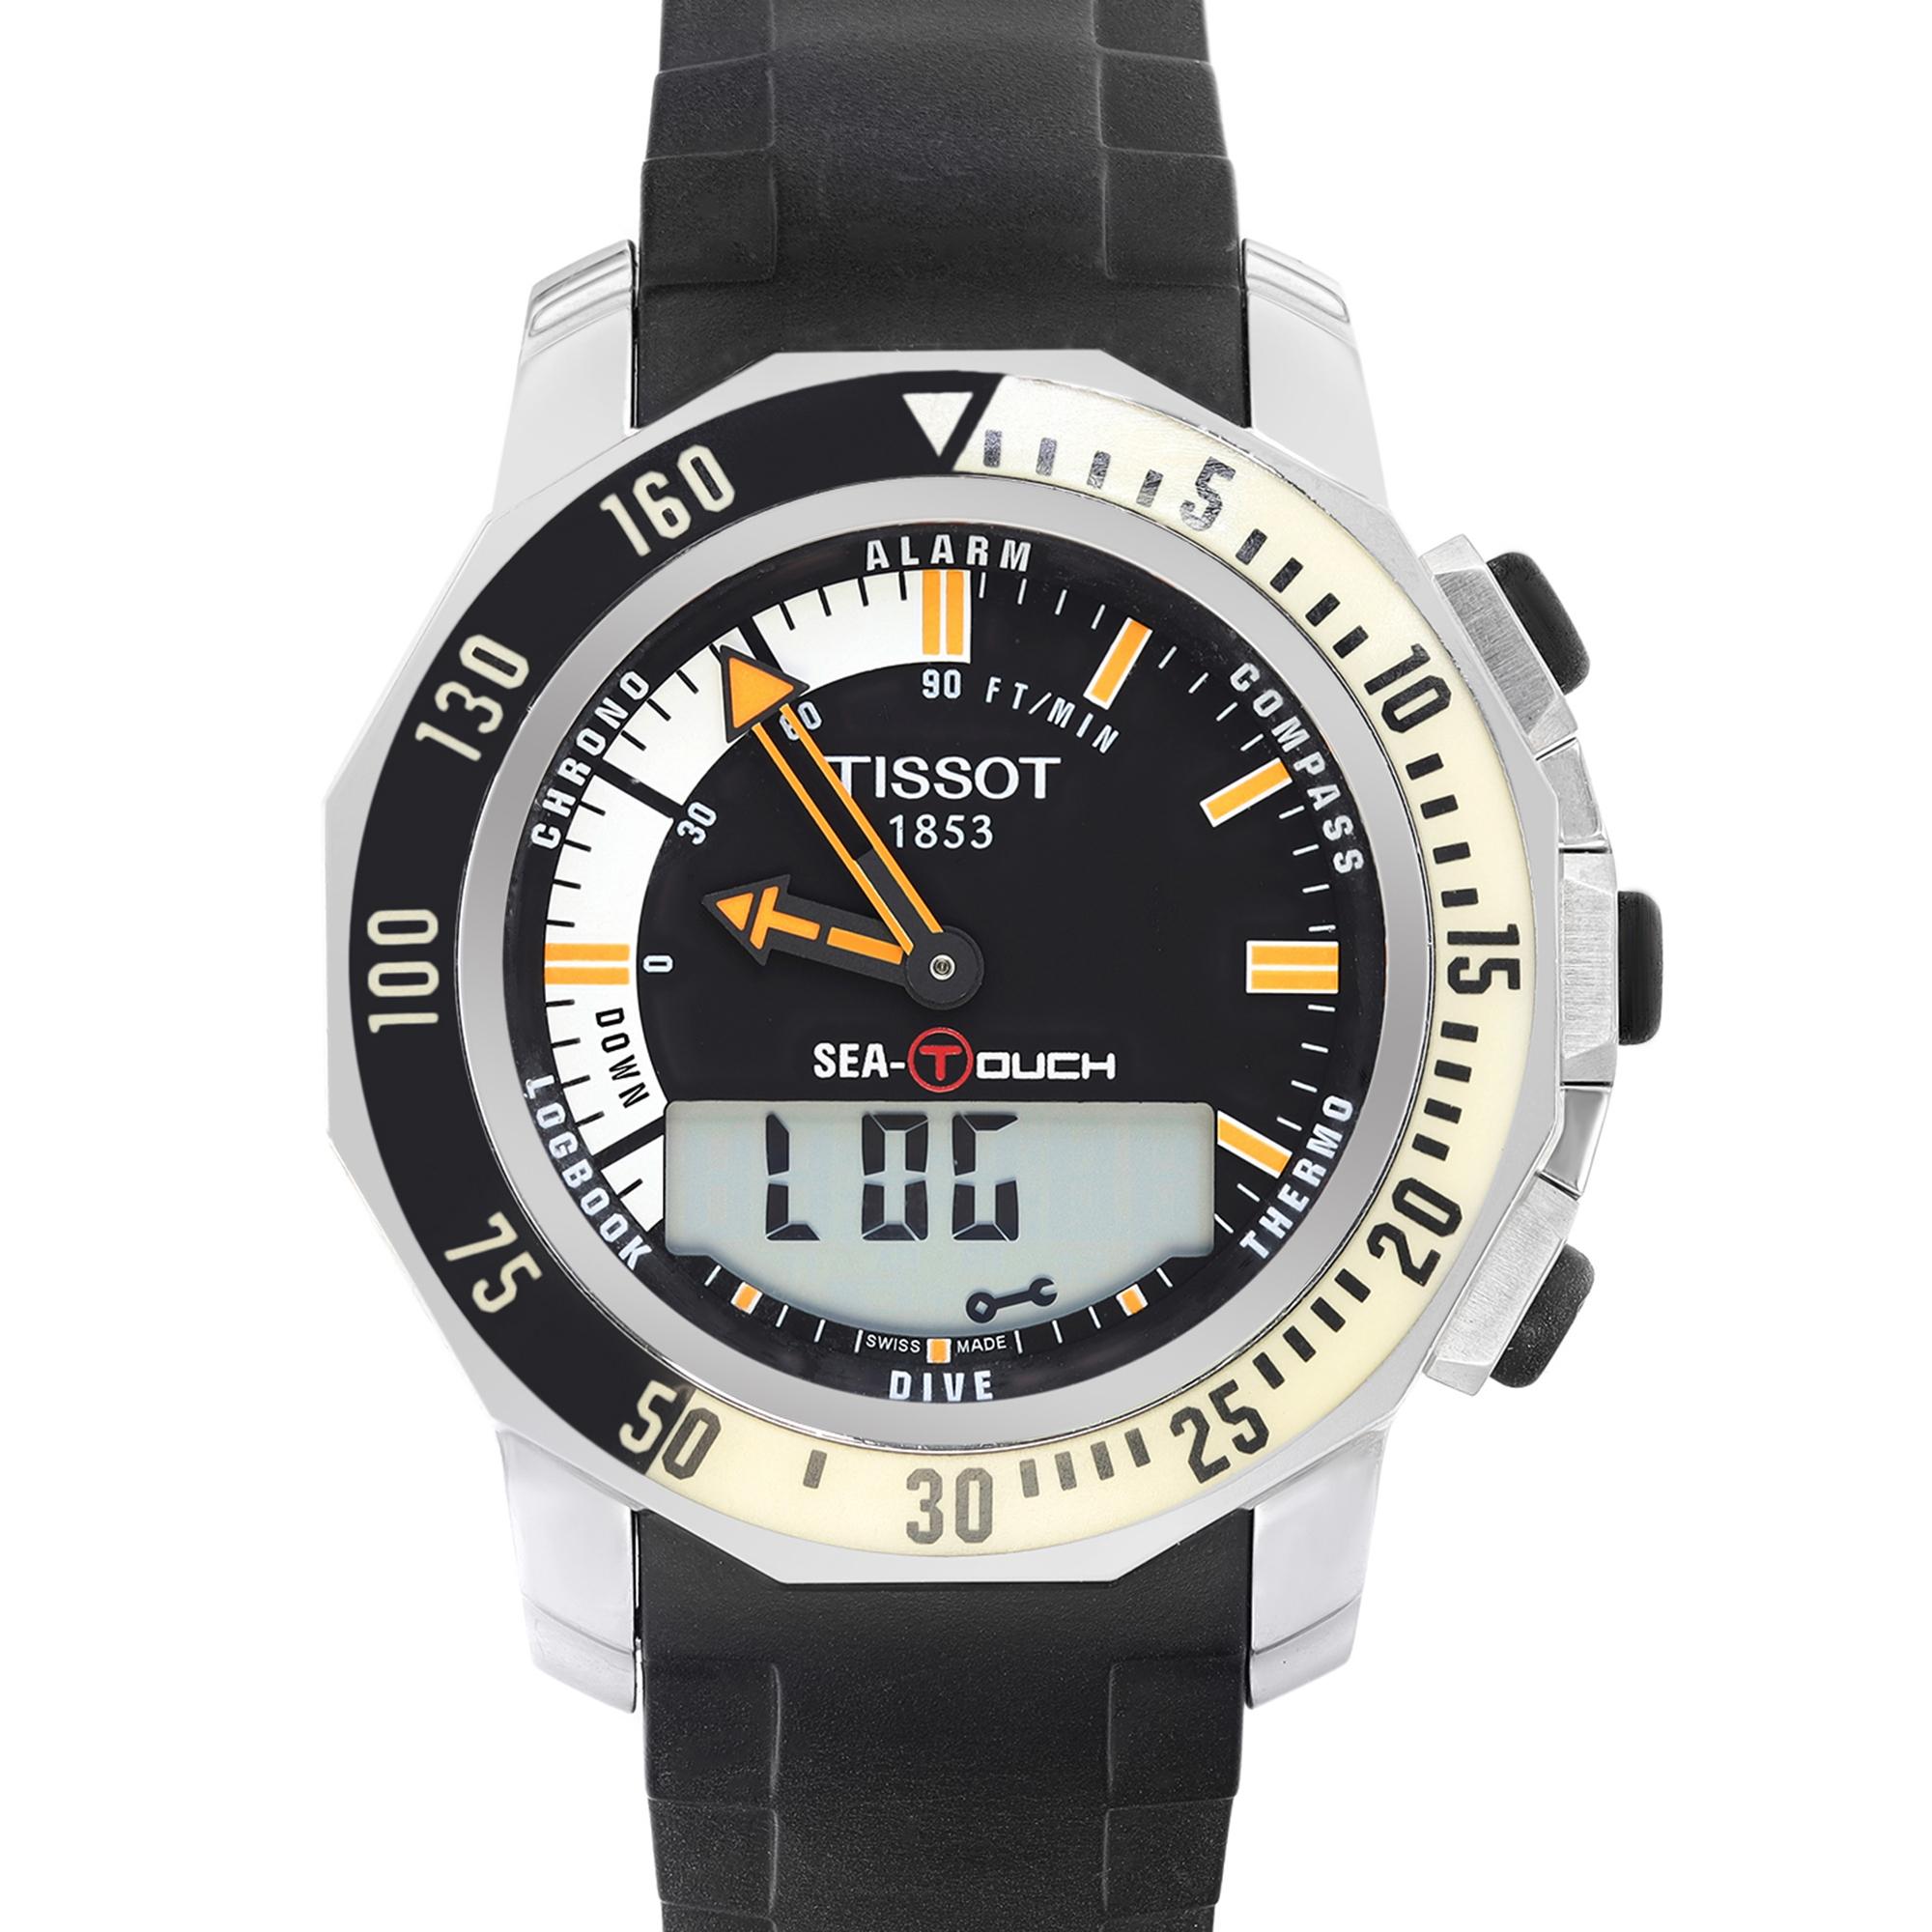 Display Model Tissot Sea-Touch Men's Watch T026.420.17.281.01. The watch was never owned or worn and only may have minor marks from storing. Quartz (Battery) Movement powers this Beautiful Timepiece. Features: Round Stainless Steel Case with a Black